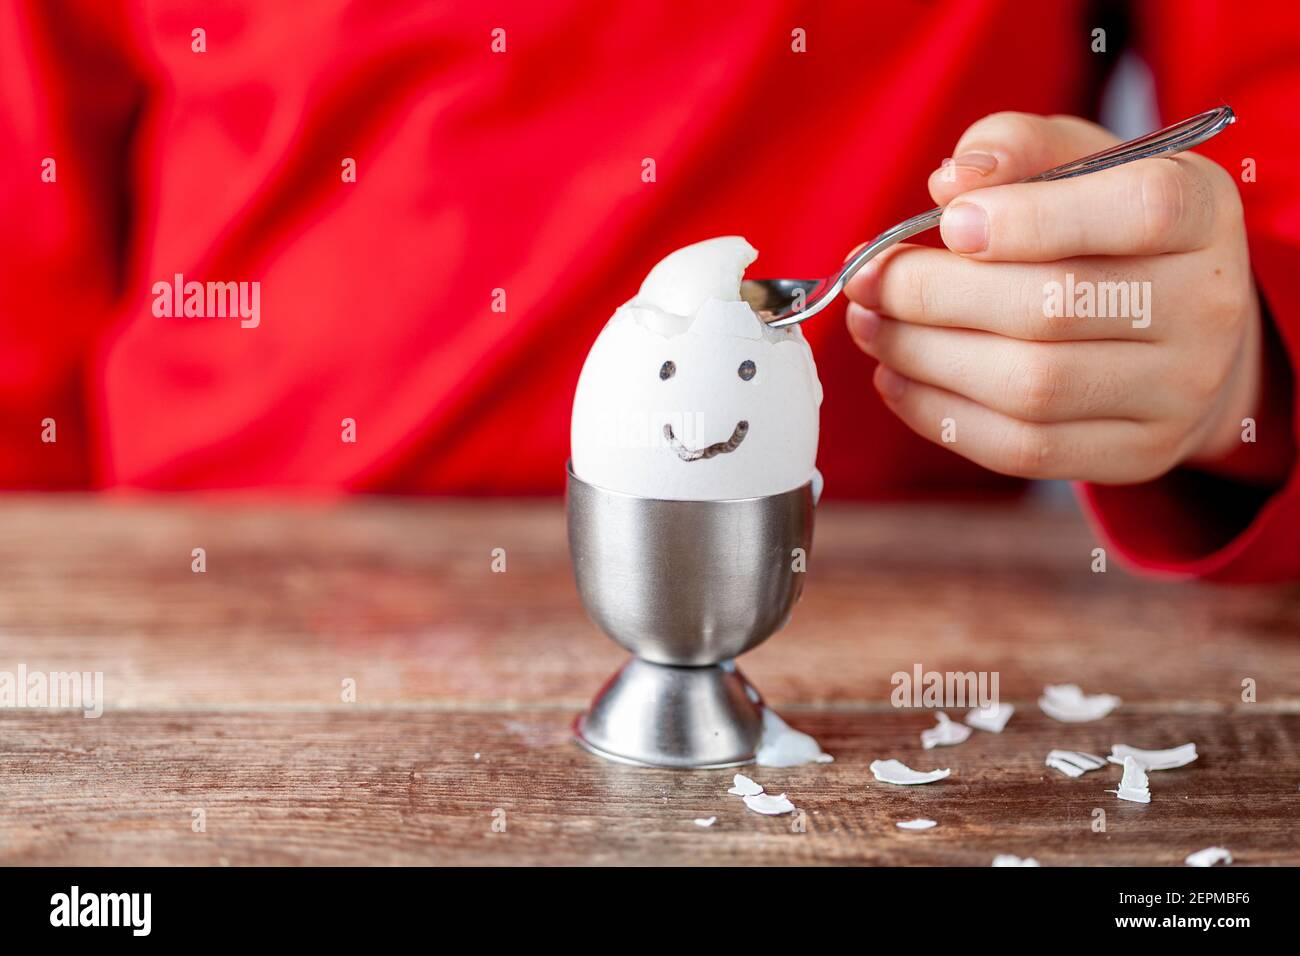 A small child is eating soft boiled humpty dumpty egg placed in egg cup on a wooden breakfast table. She uses spoon to eat the egg from its shell. She Stock Photo